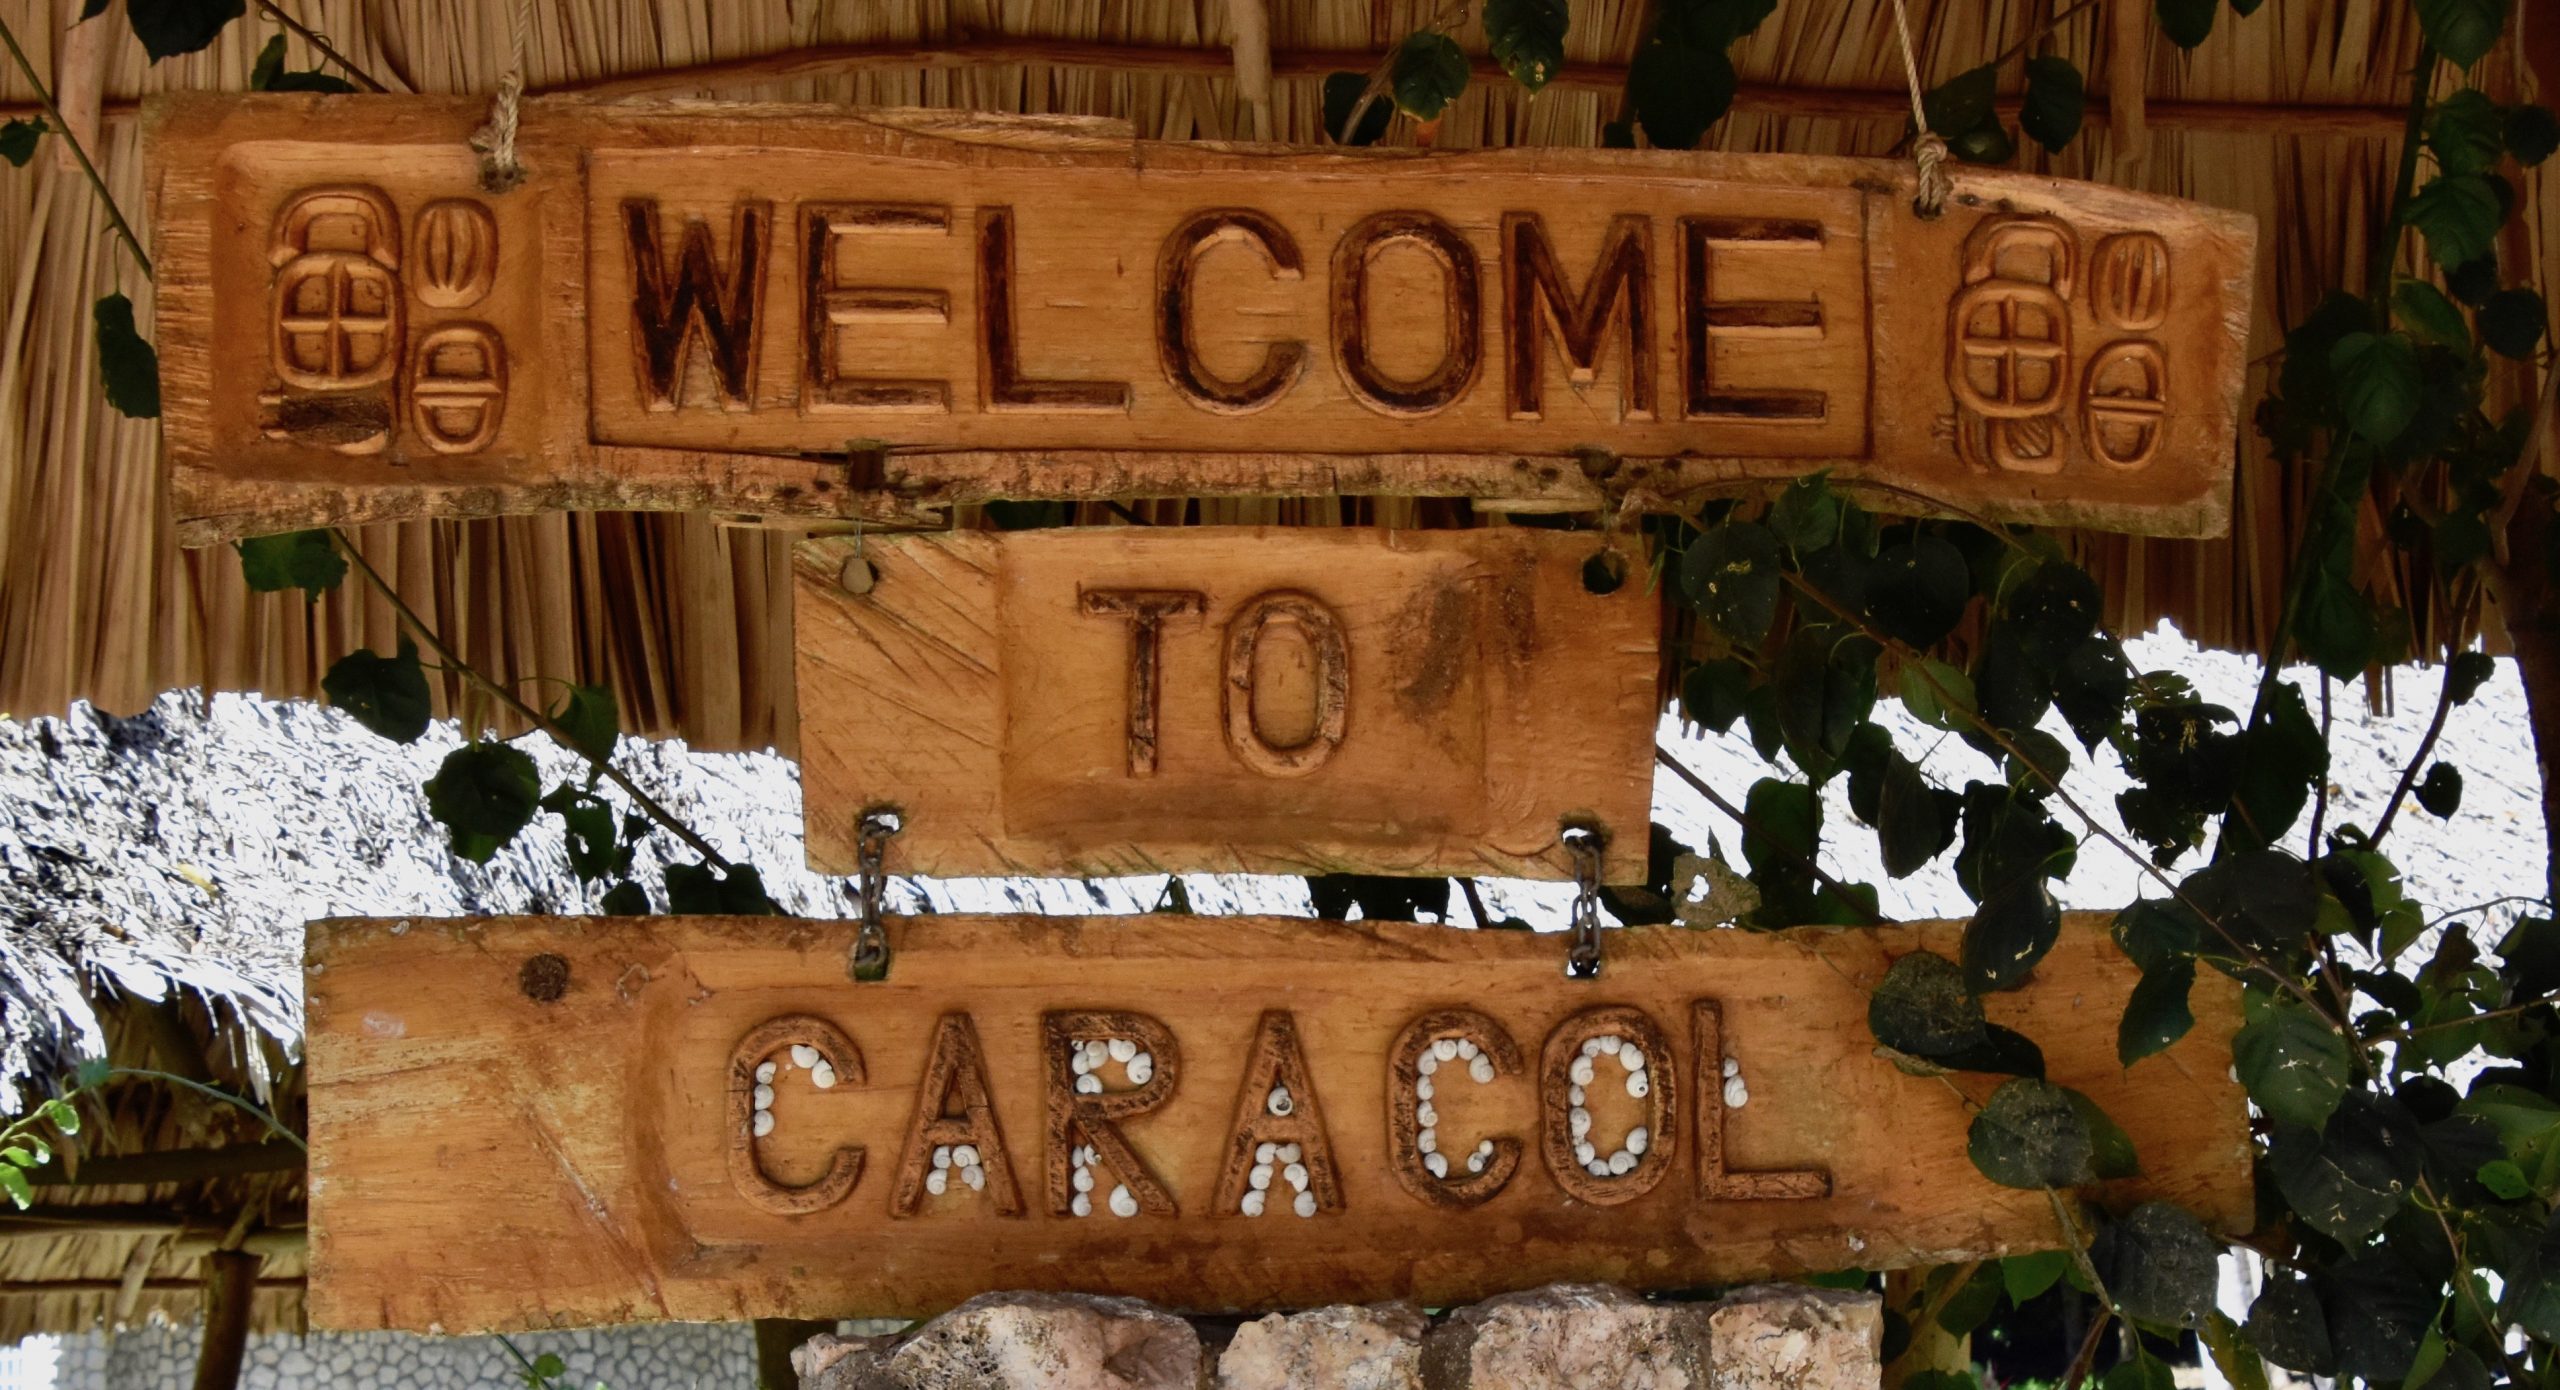 Caracol Sign